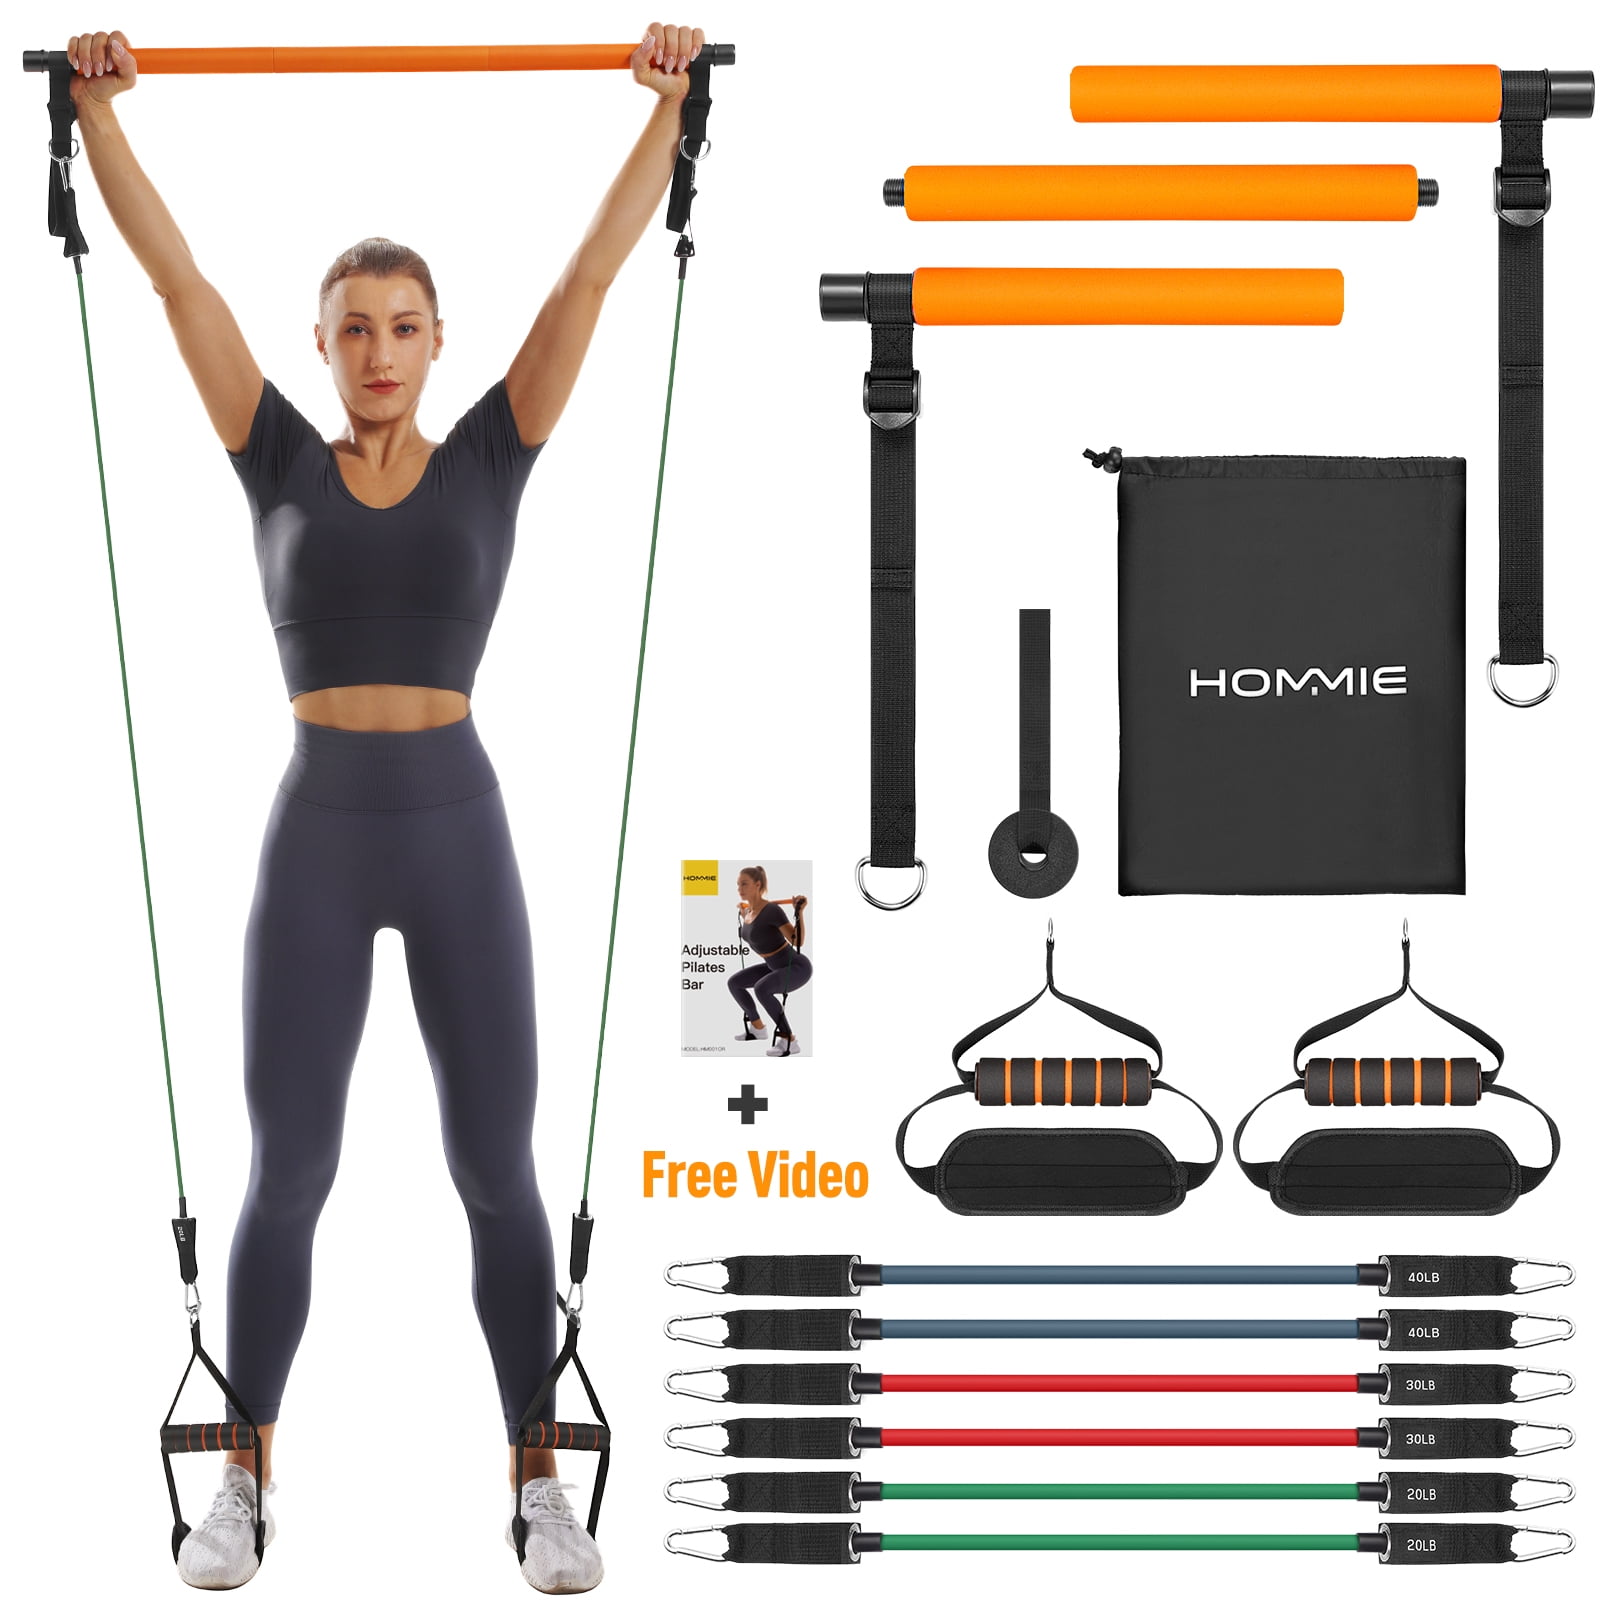 Hommie Yoga Kit, Pilates Bar Sets with Resistance Bands, Fitness